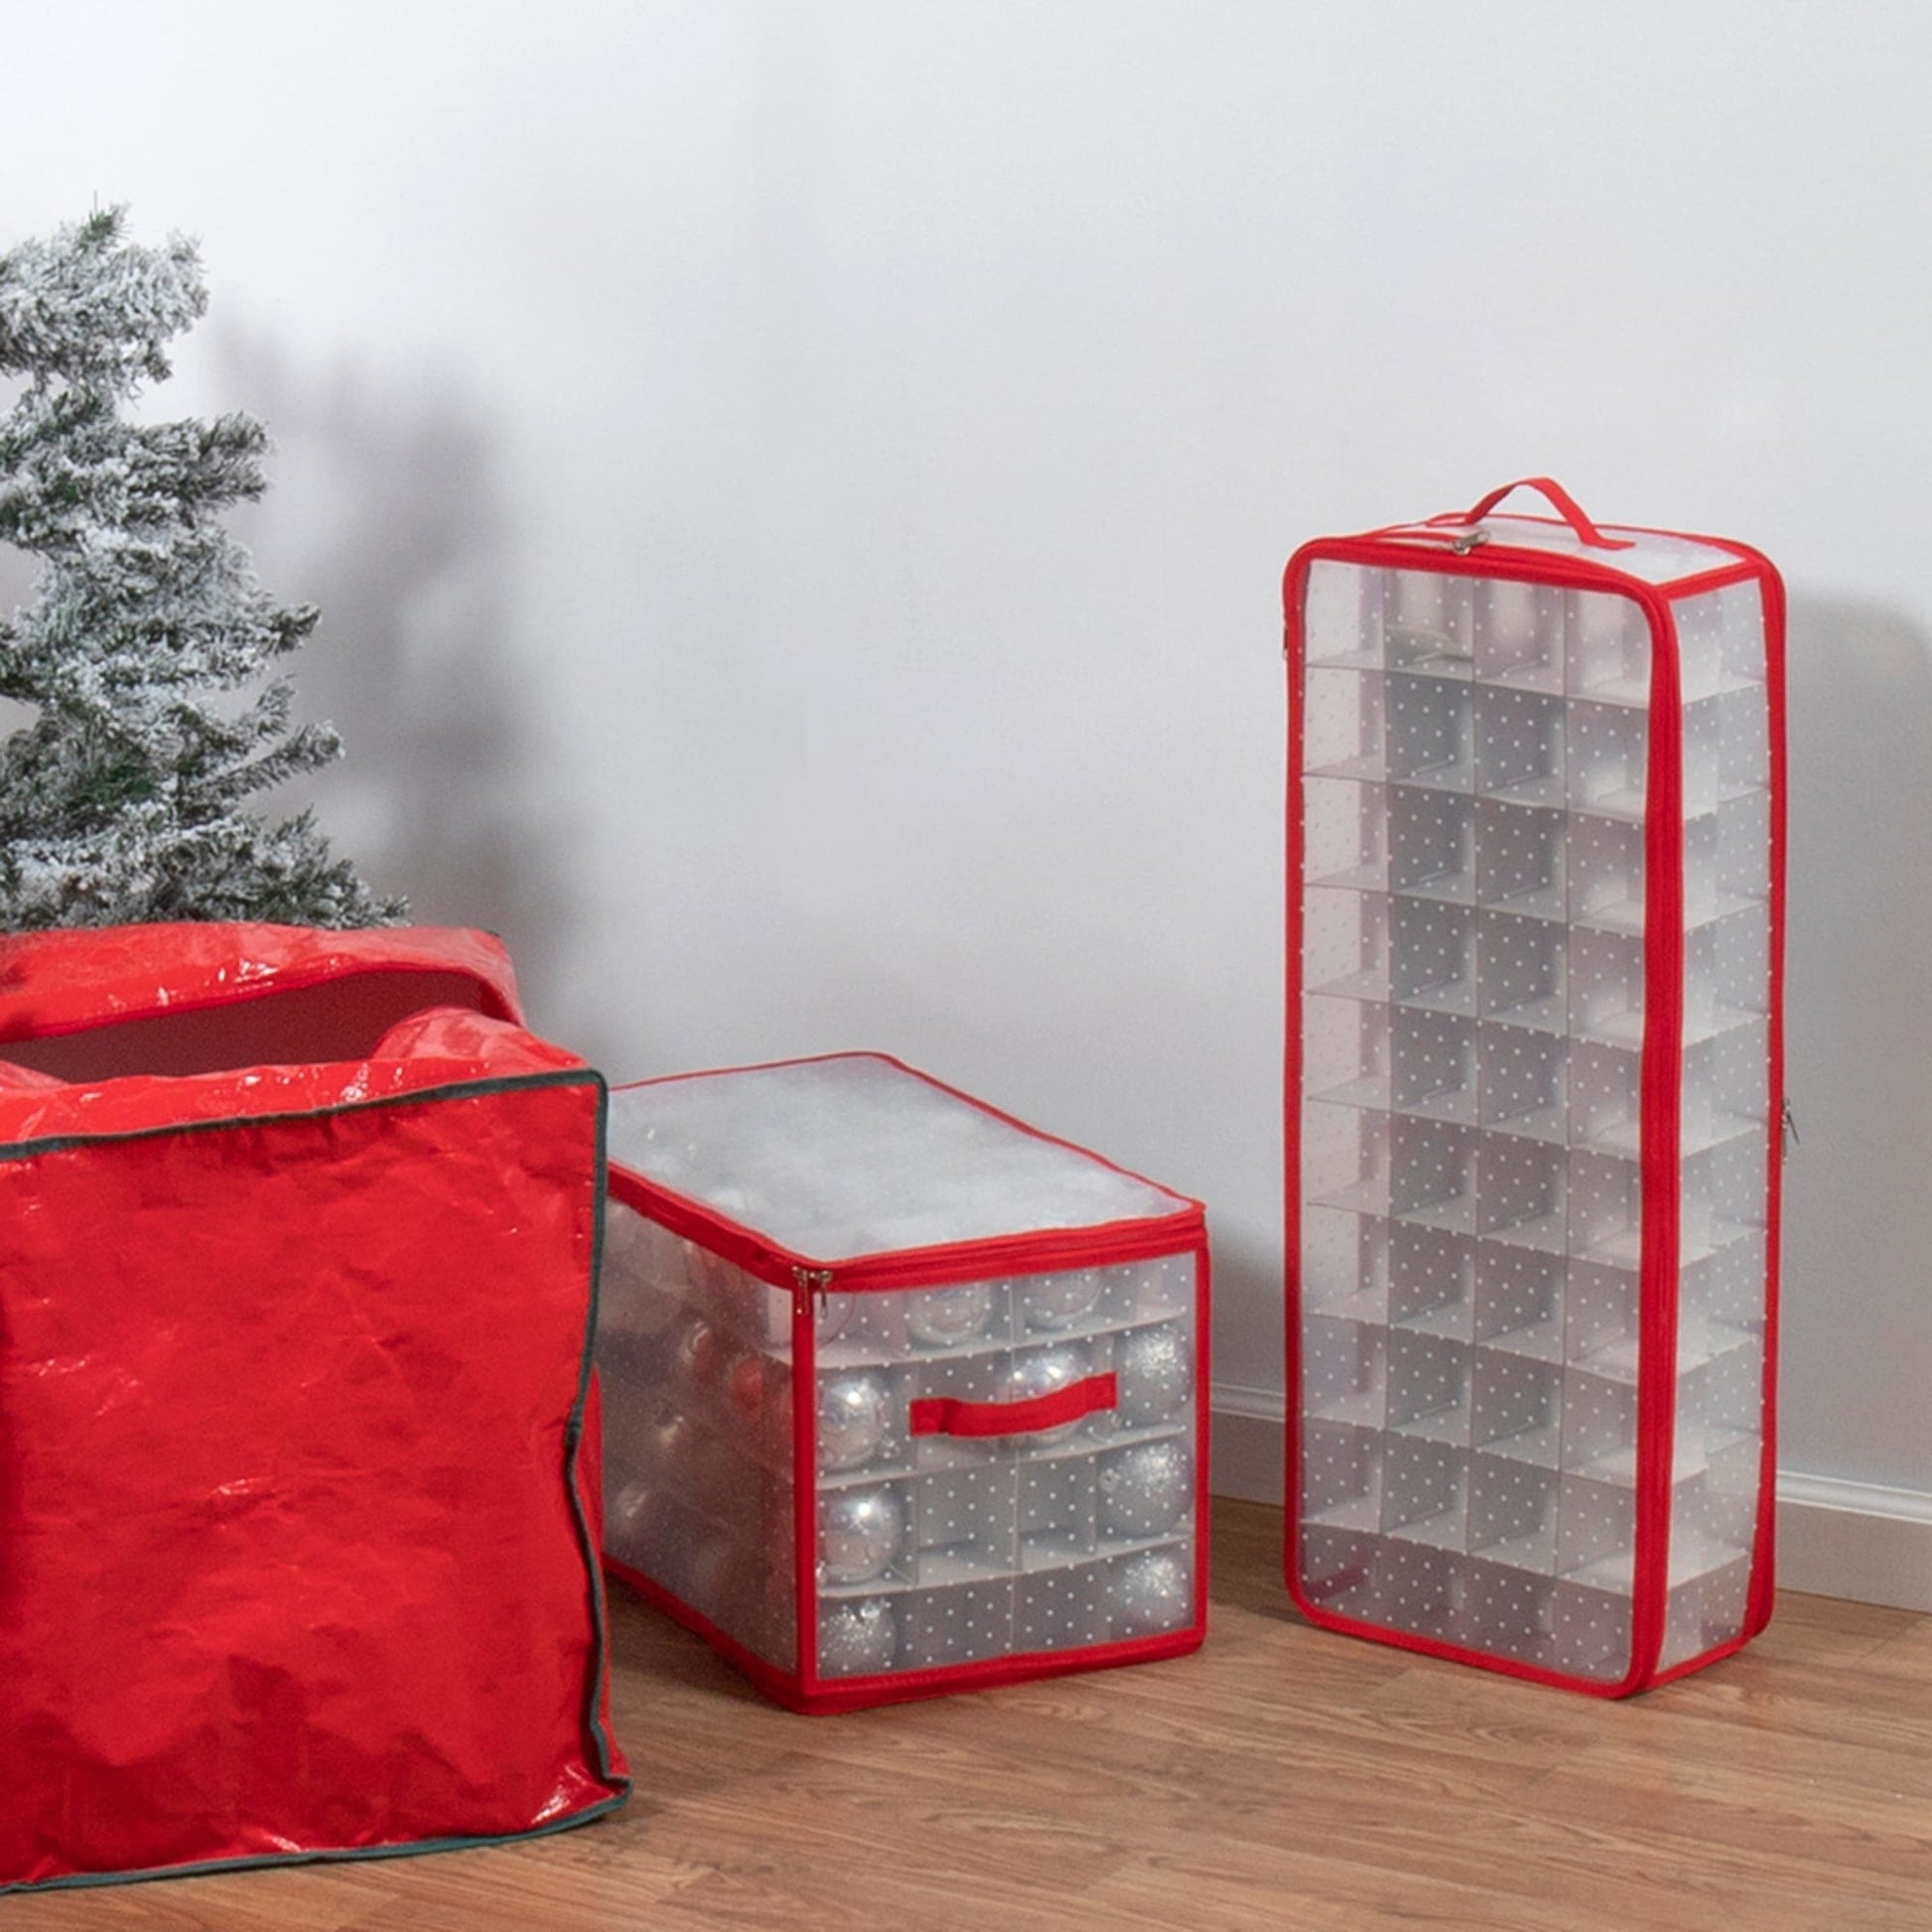 Christmas Ornament Storage Container - household items - by owner